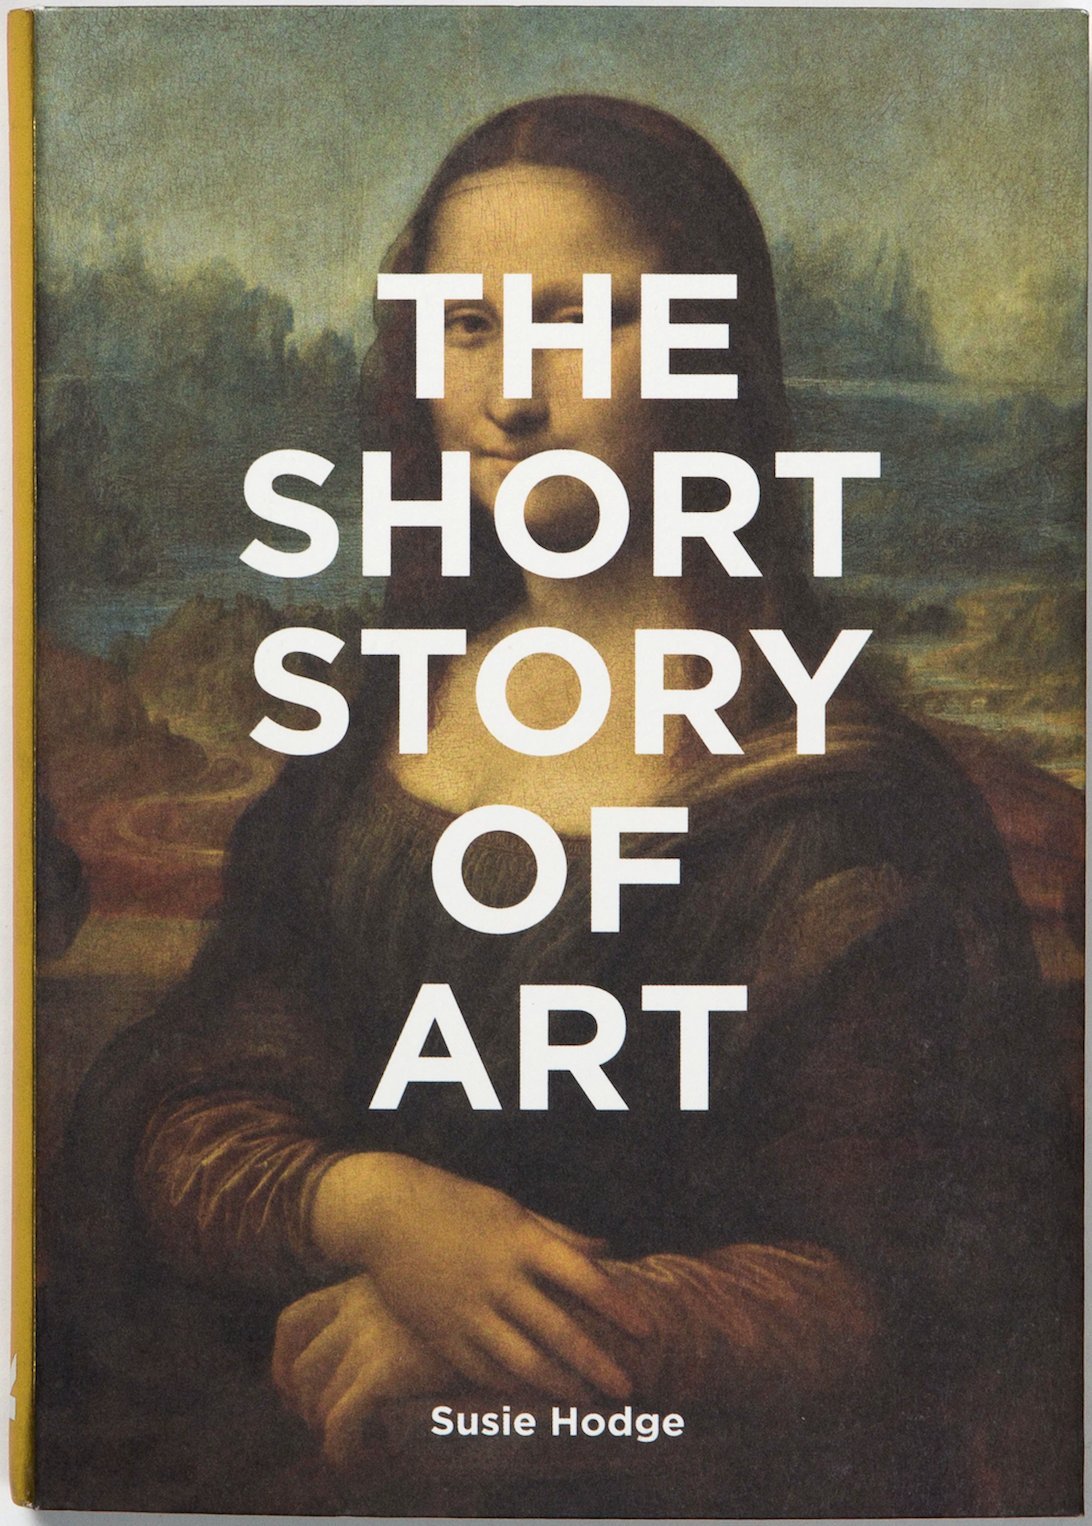 The Short Story of Art | Susie Hodge